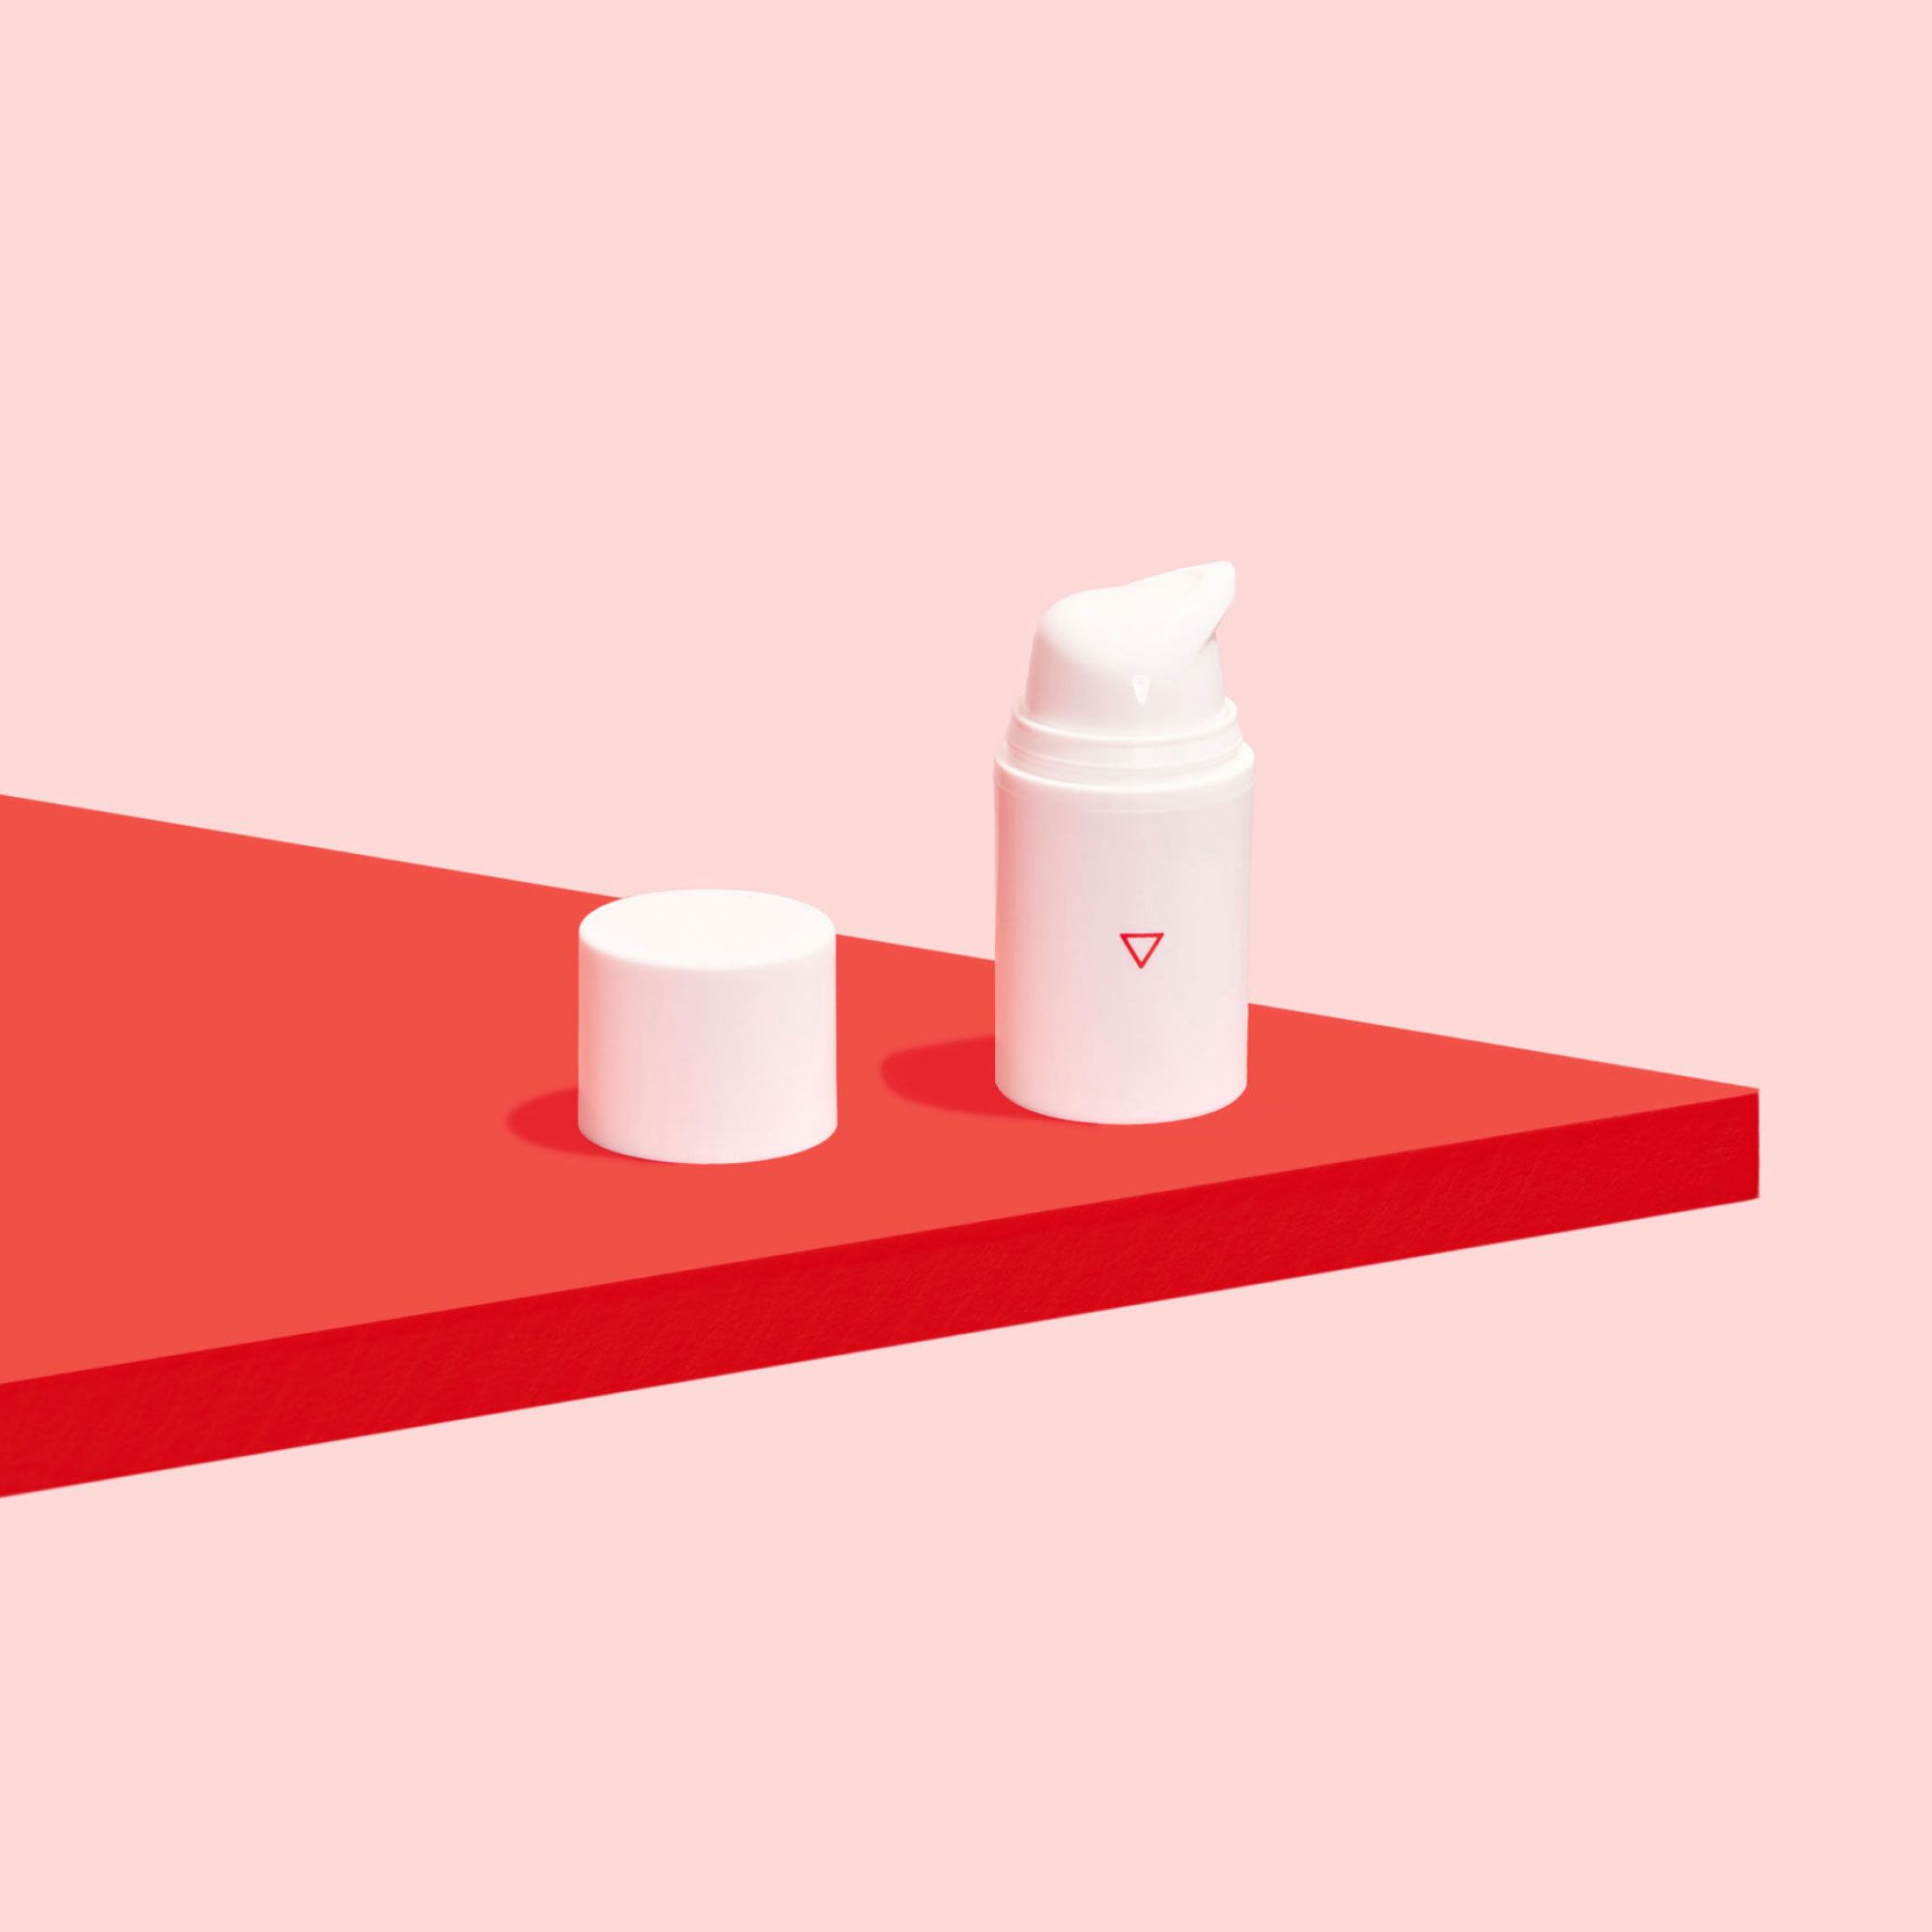 Bottle of topical Lidocaine cream to treat oral and genital herpes outbreaks on red surface, on pink background